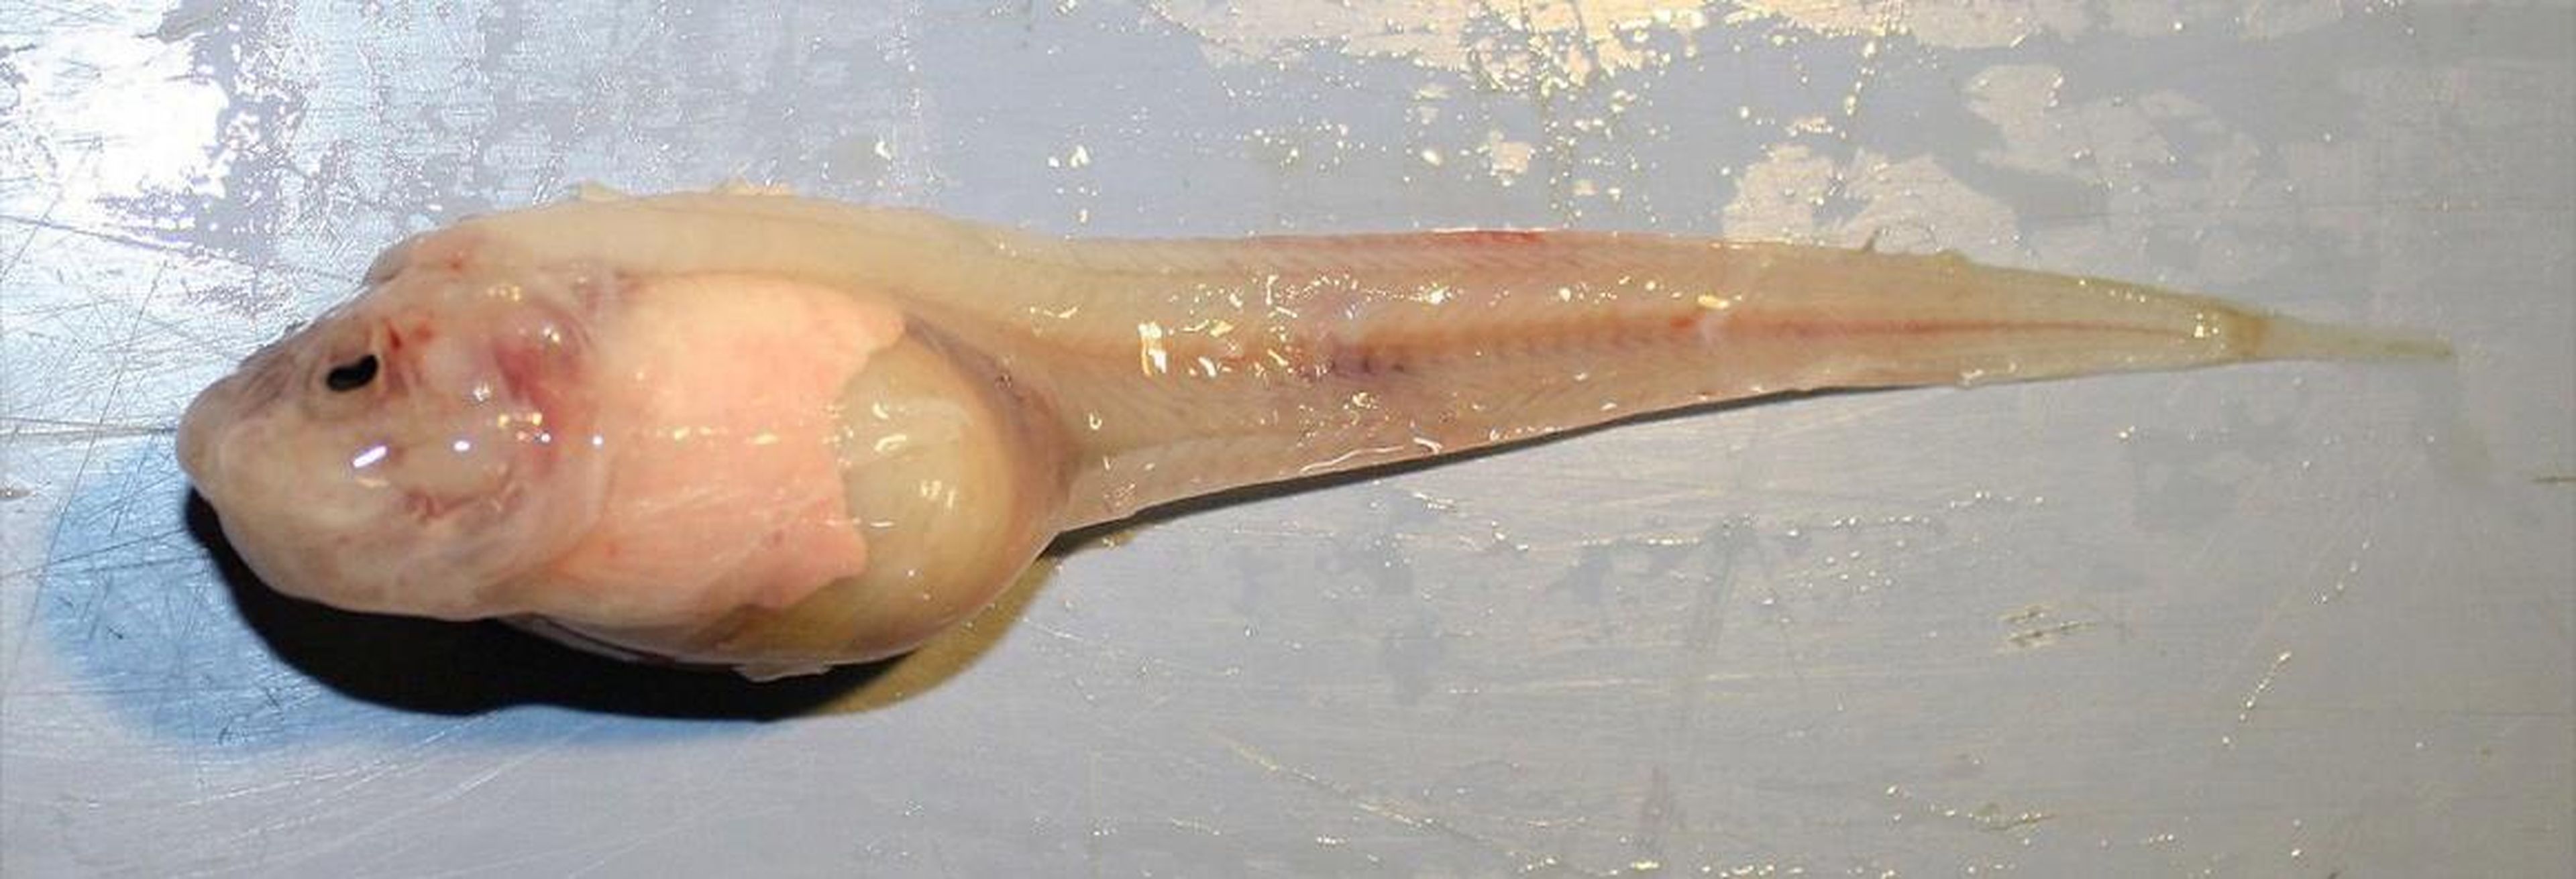 <em>Pseudoliparis swirei</em>, also known as the Mariana snailfish, is the deepest known fish in the sea.